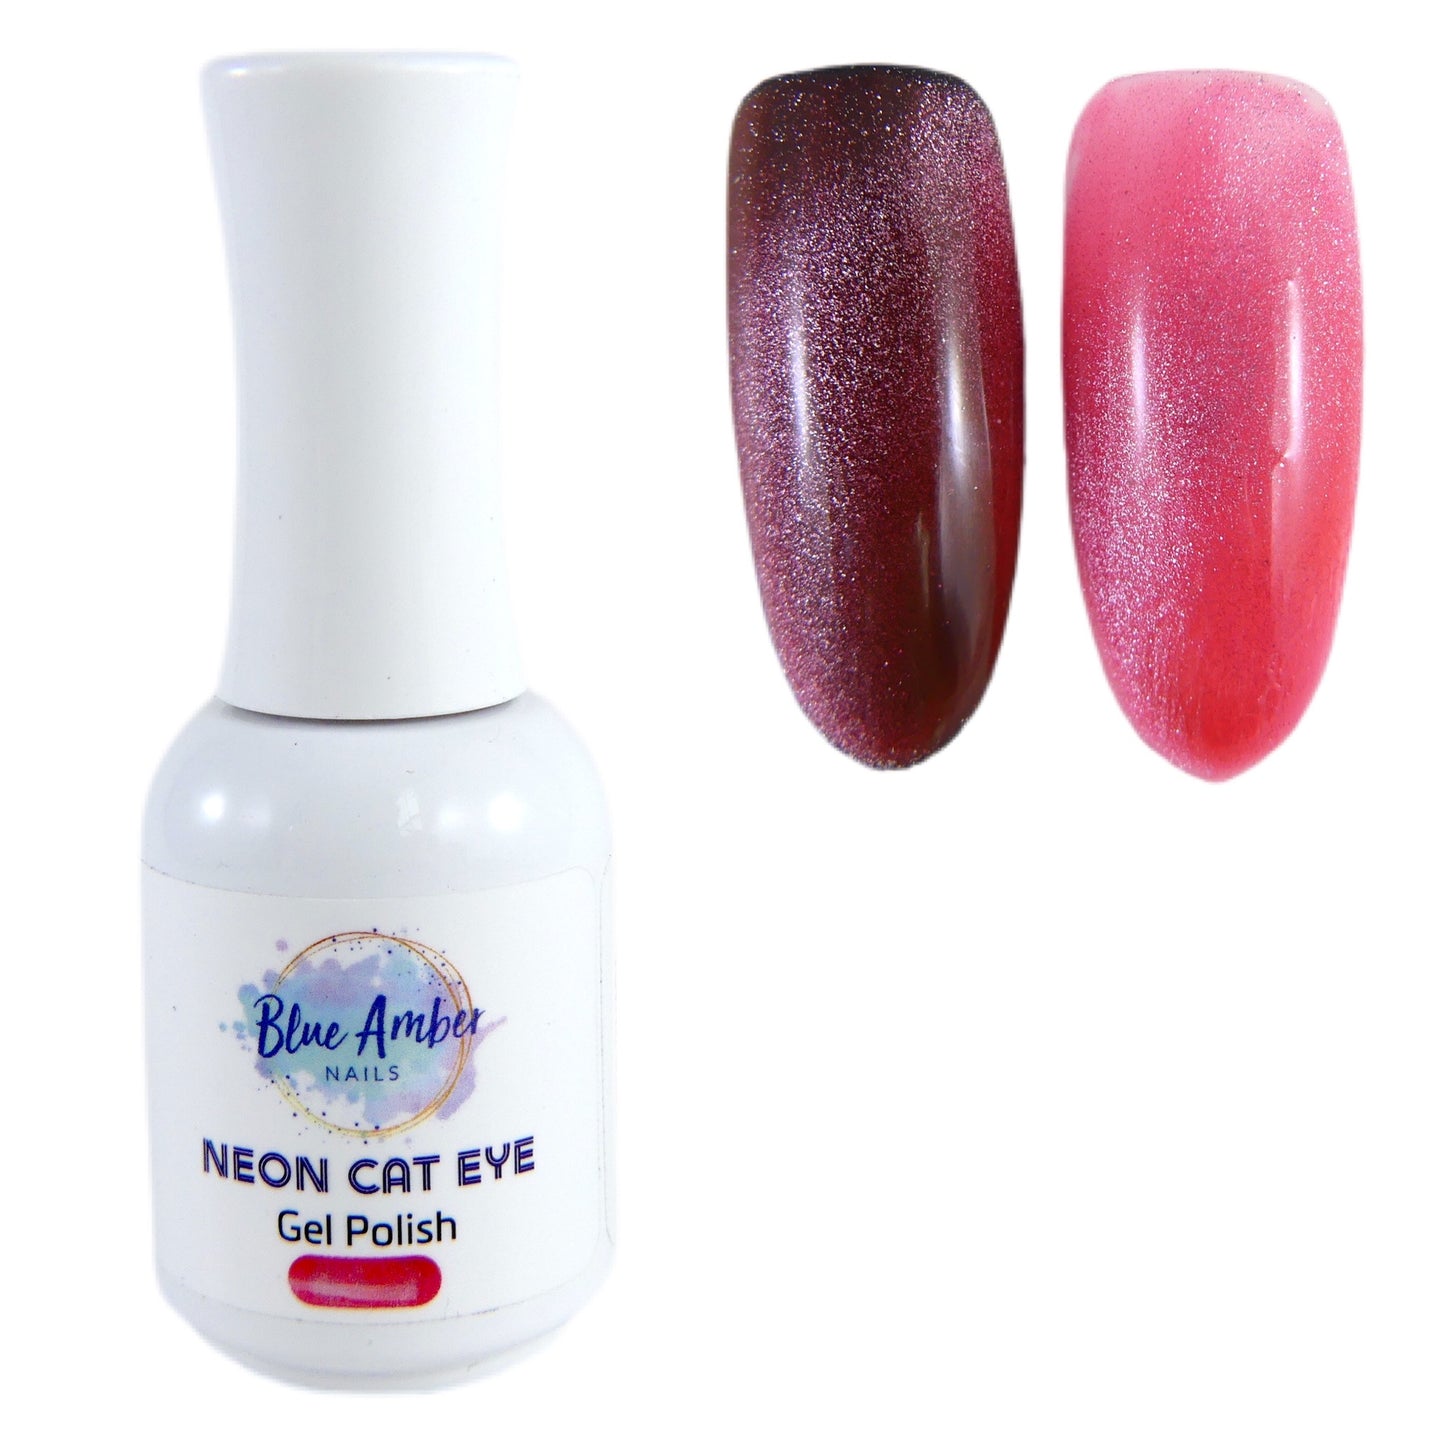 Load image into Gallery viewer, Neon Cat Eye Gel Polish - Coral - My Little Nail Art Shop
